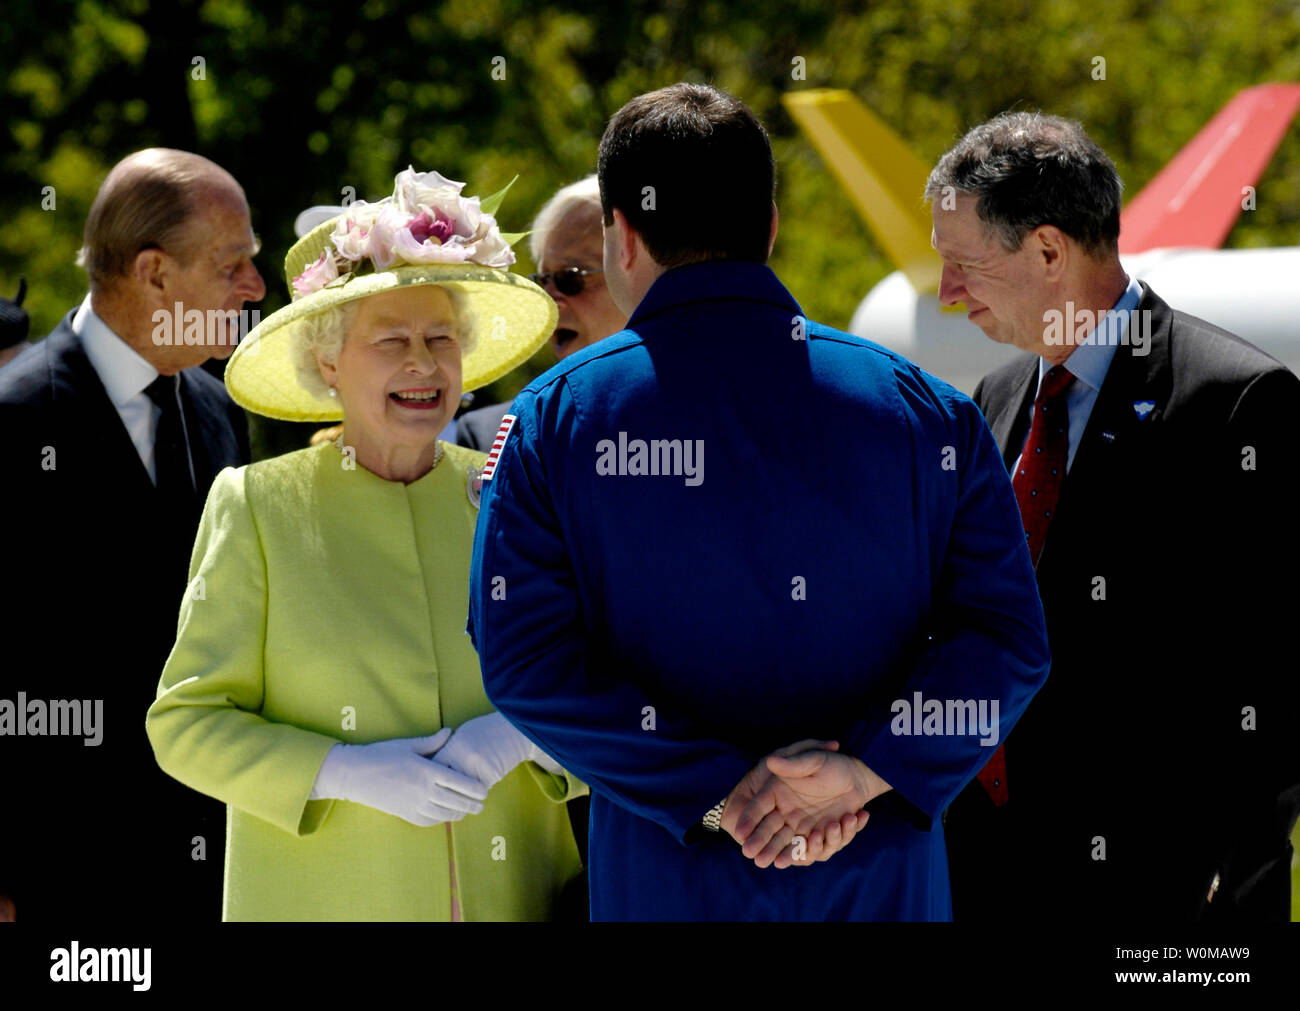 Britain's Queen Elizabeth II and Prince Philip, Duke of Edinburgh speak with STS-116 astronaut Nicholas Patrick (2nd R) and NASA Administrator Michael Griffin (R) during their visit to the NASA Goddard Space Flight Center in Greenbelt, Maryland on May 8, 2007. (UPI Photo/Paul E. Alers/NASA) Stock Photo